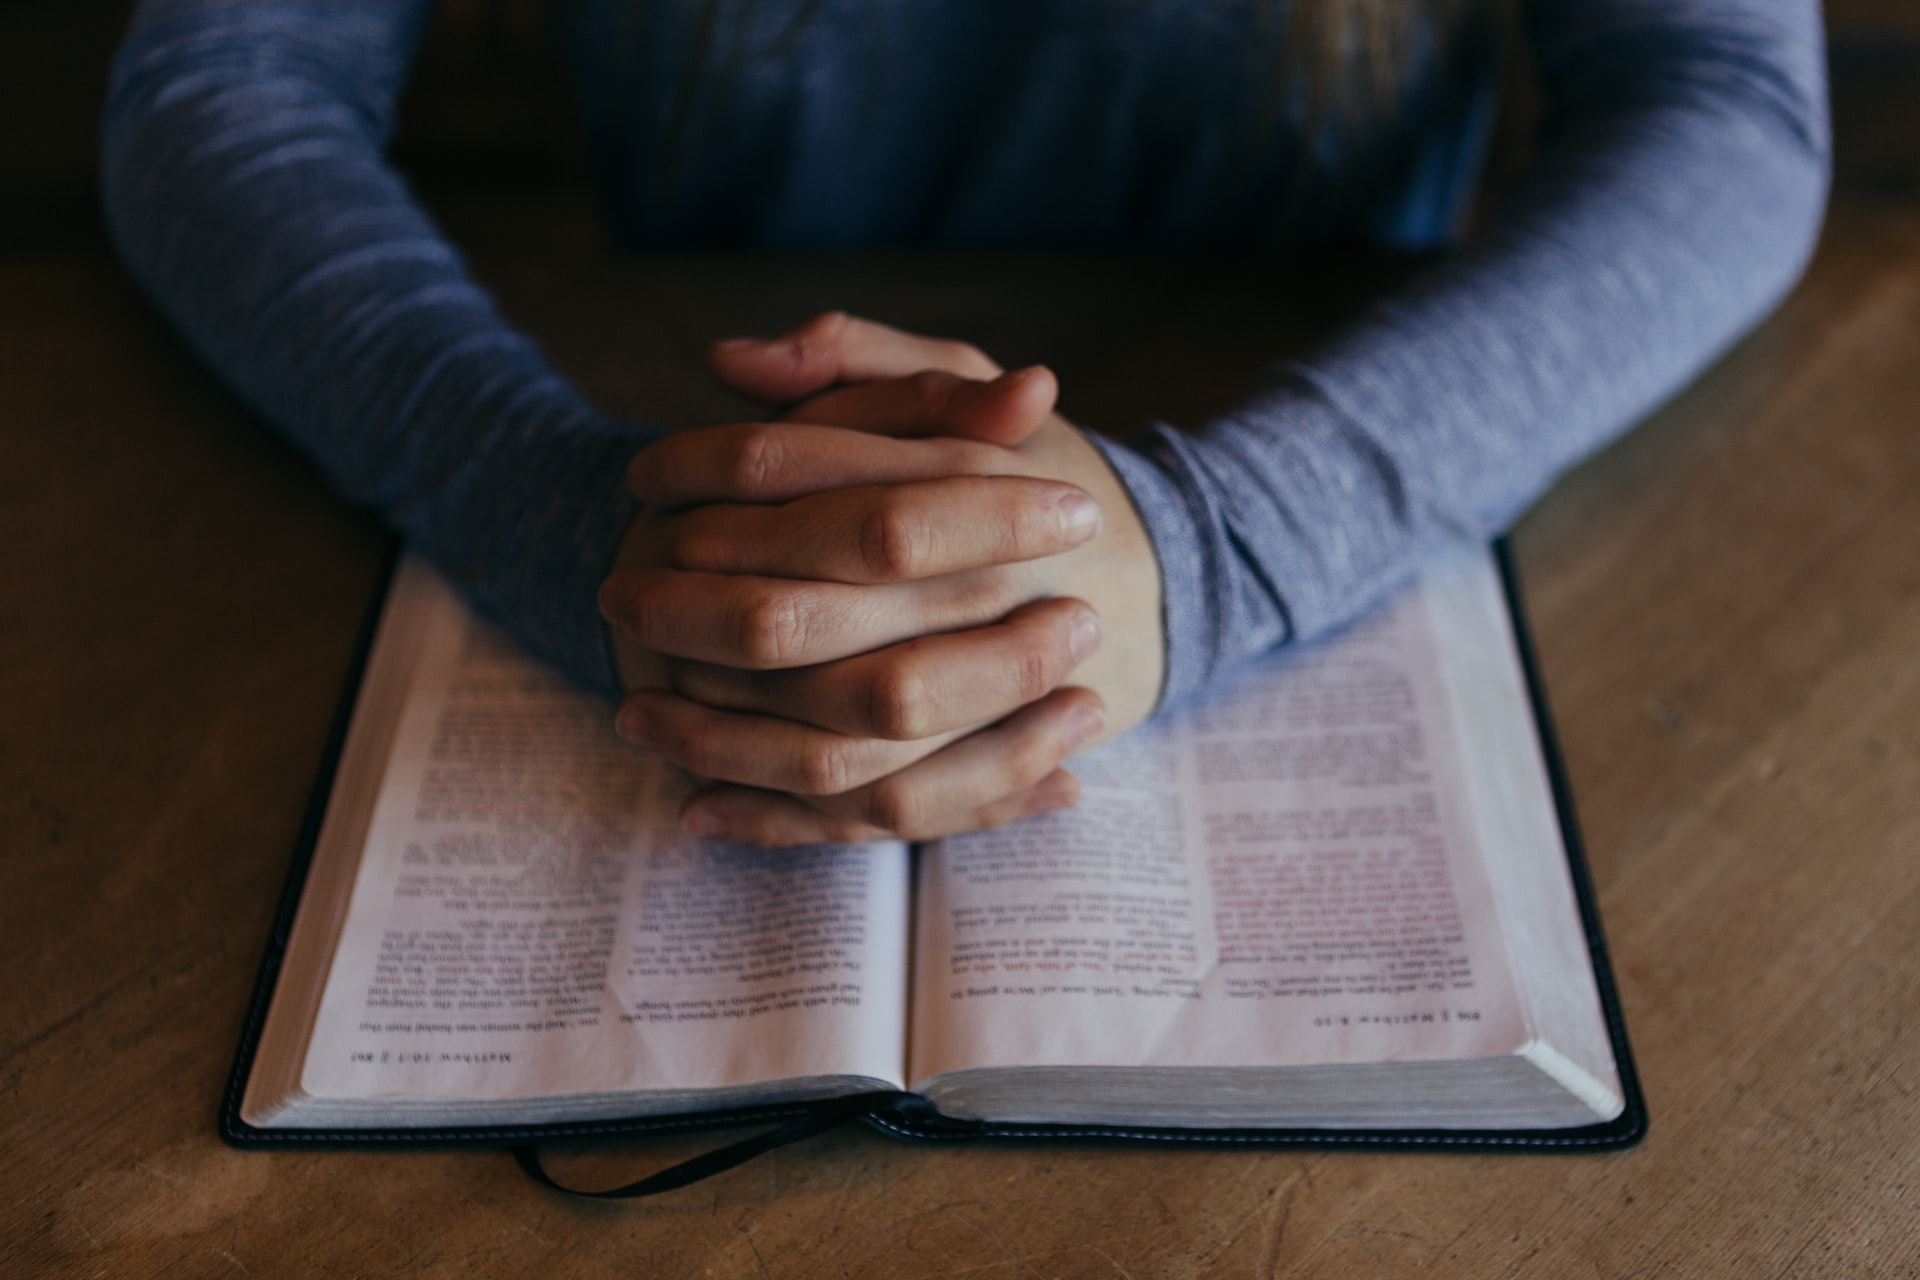 hands clasped over bible on a desk